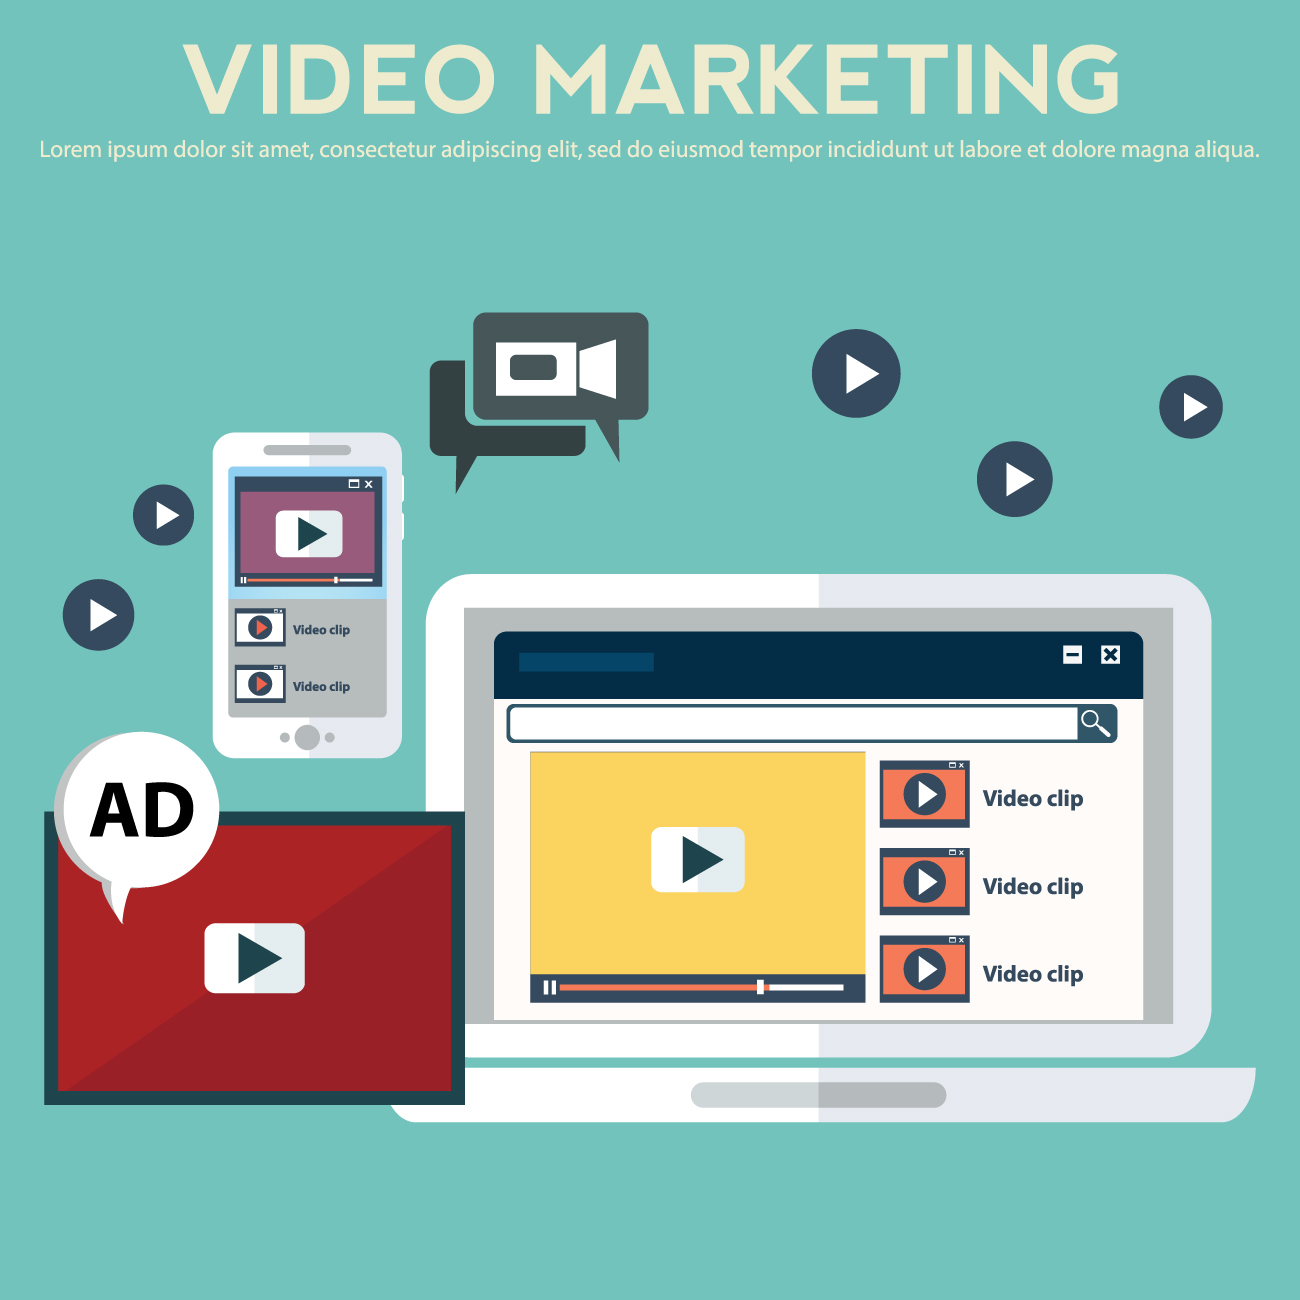 Image featuring video marketing